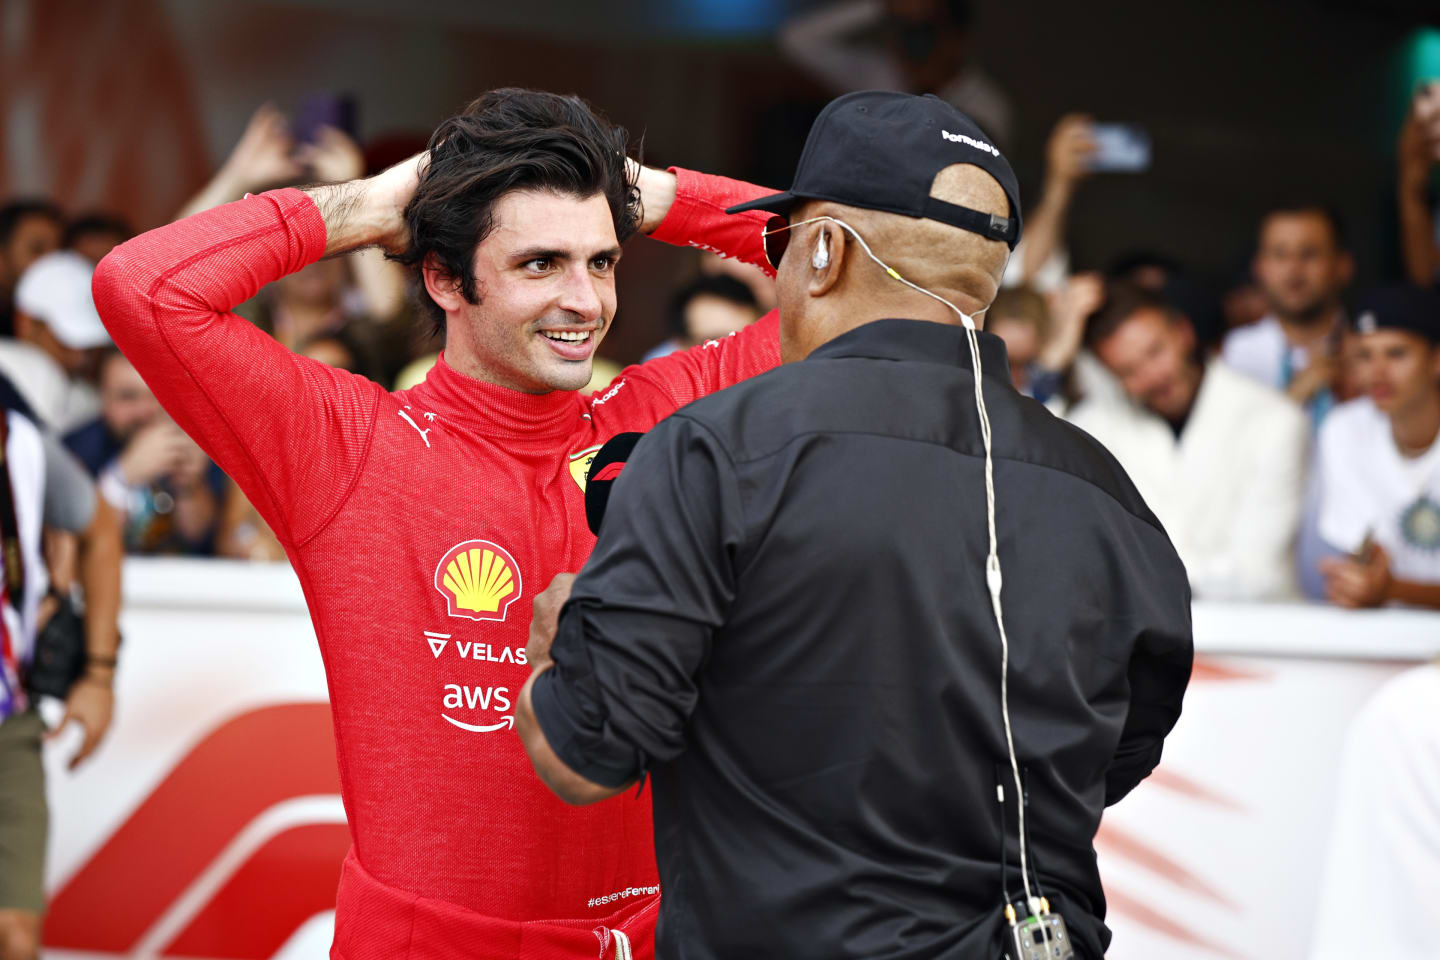 MIAMI, FLORIDA - MAY 08: Third placed Carlos Sainz of Spain and Ferrari talks with Willy T Ribbs in